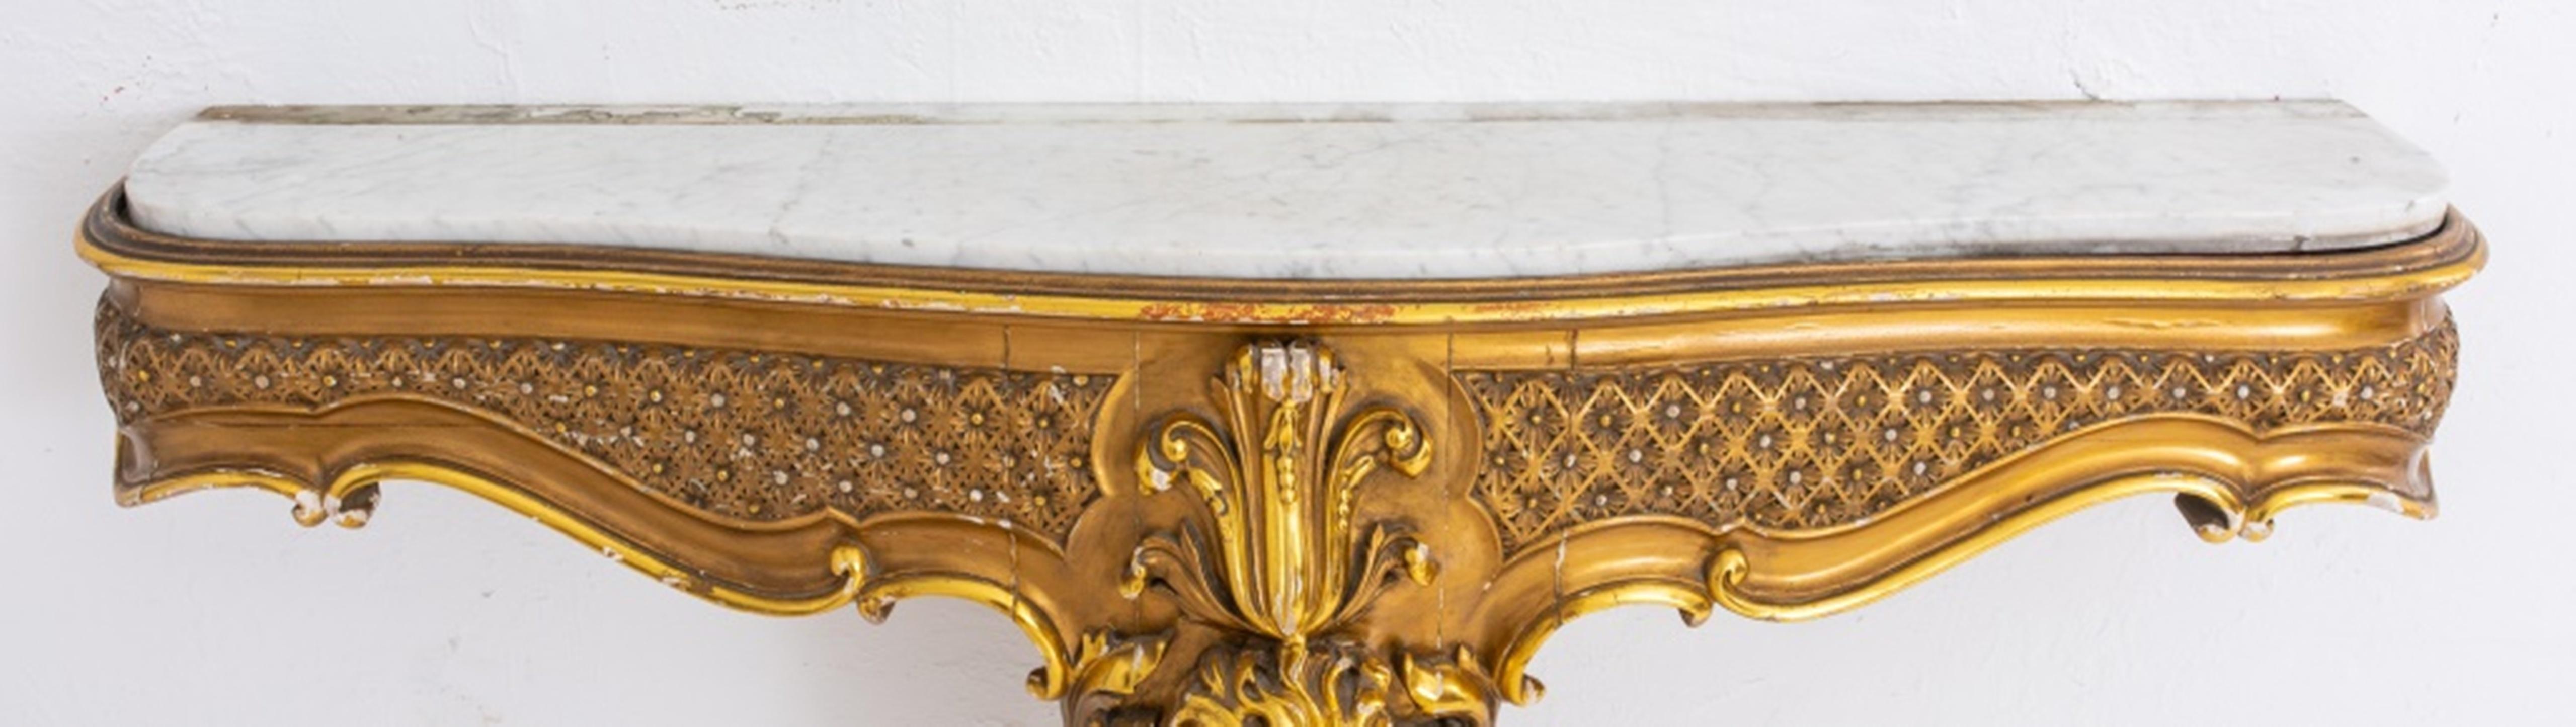 18th Century Louis XIV Style Monopodal Giltwood Console For Sale